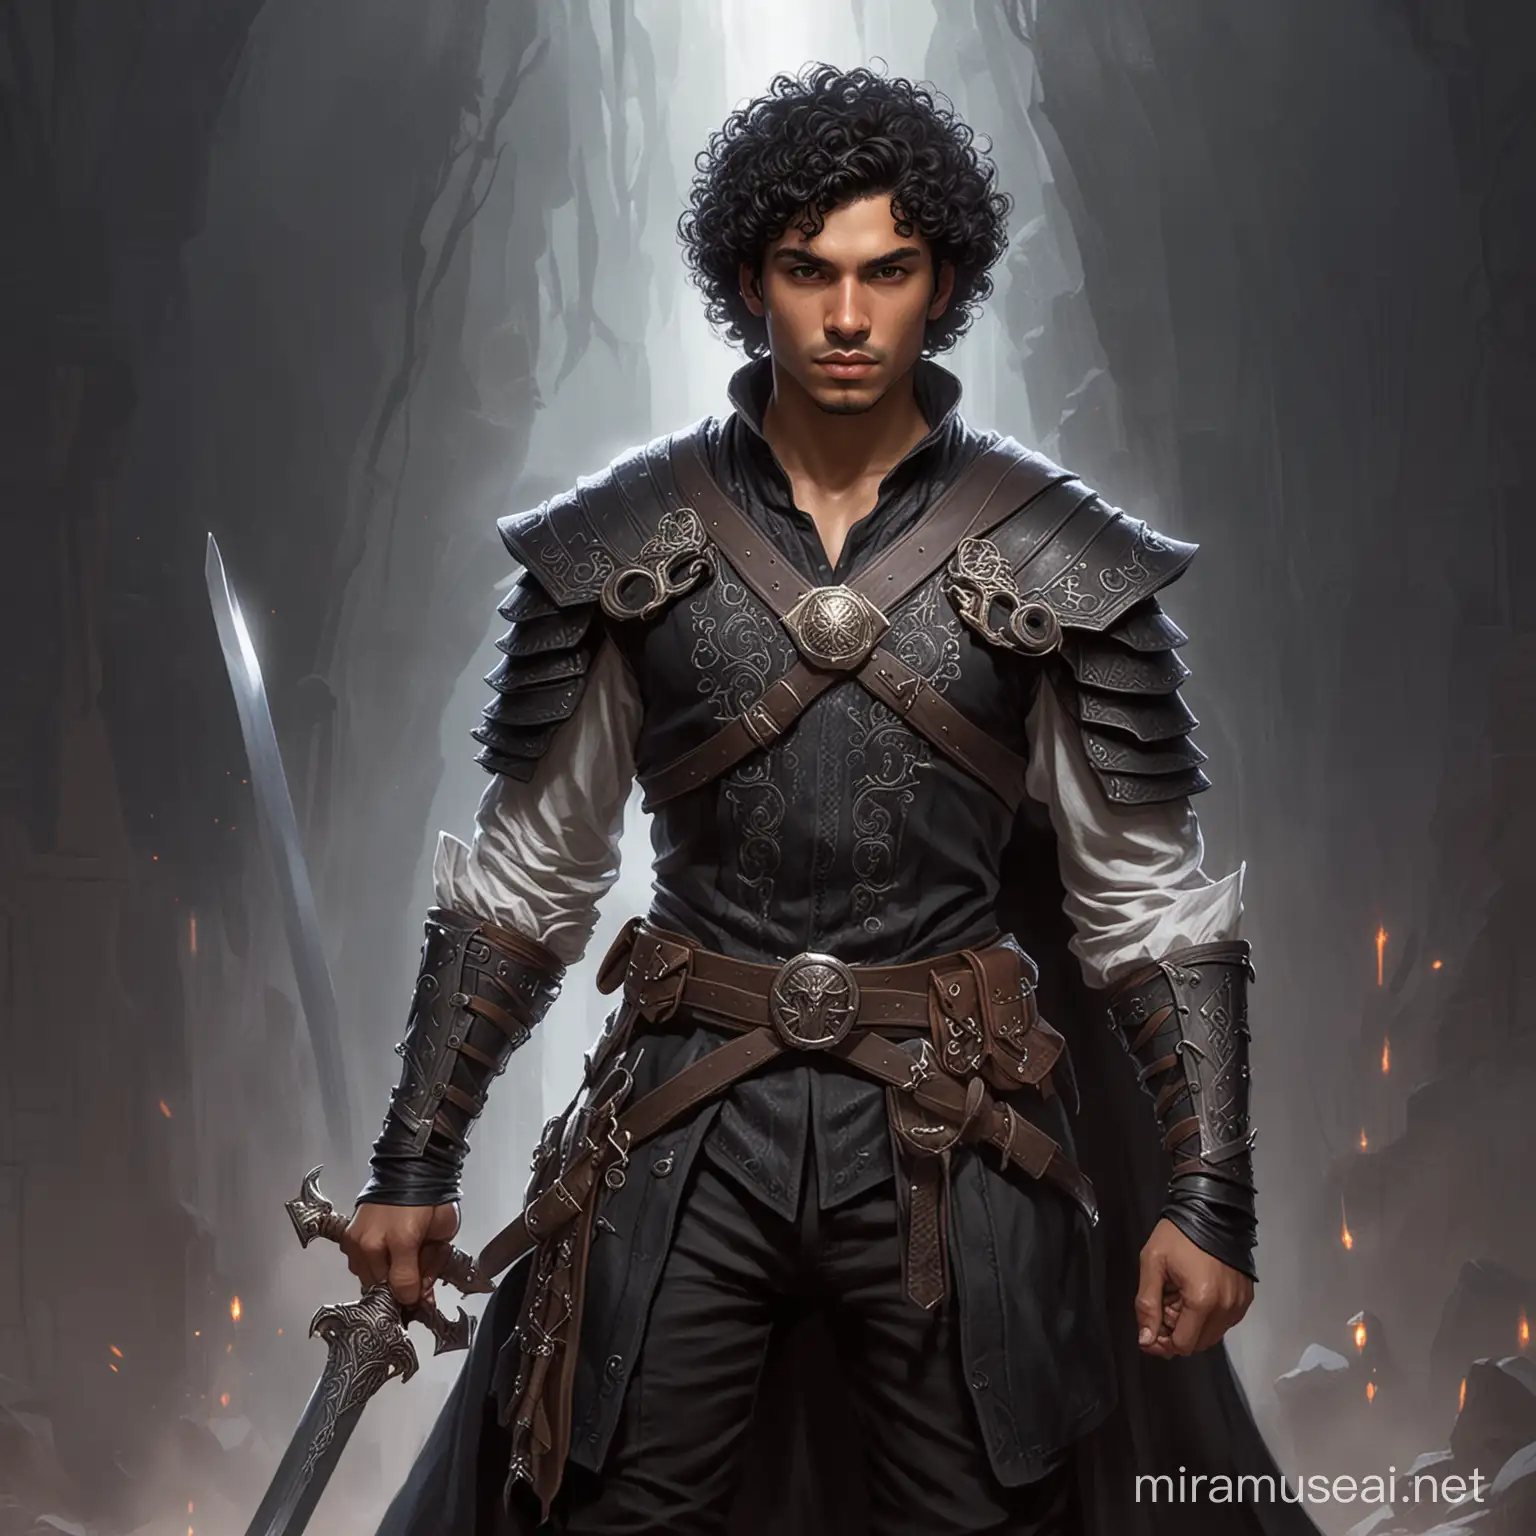 latino male with short curly black hair, wearing wizard attire, holding a sword, in fantasy DnD style